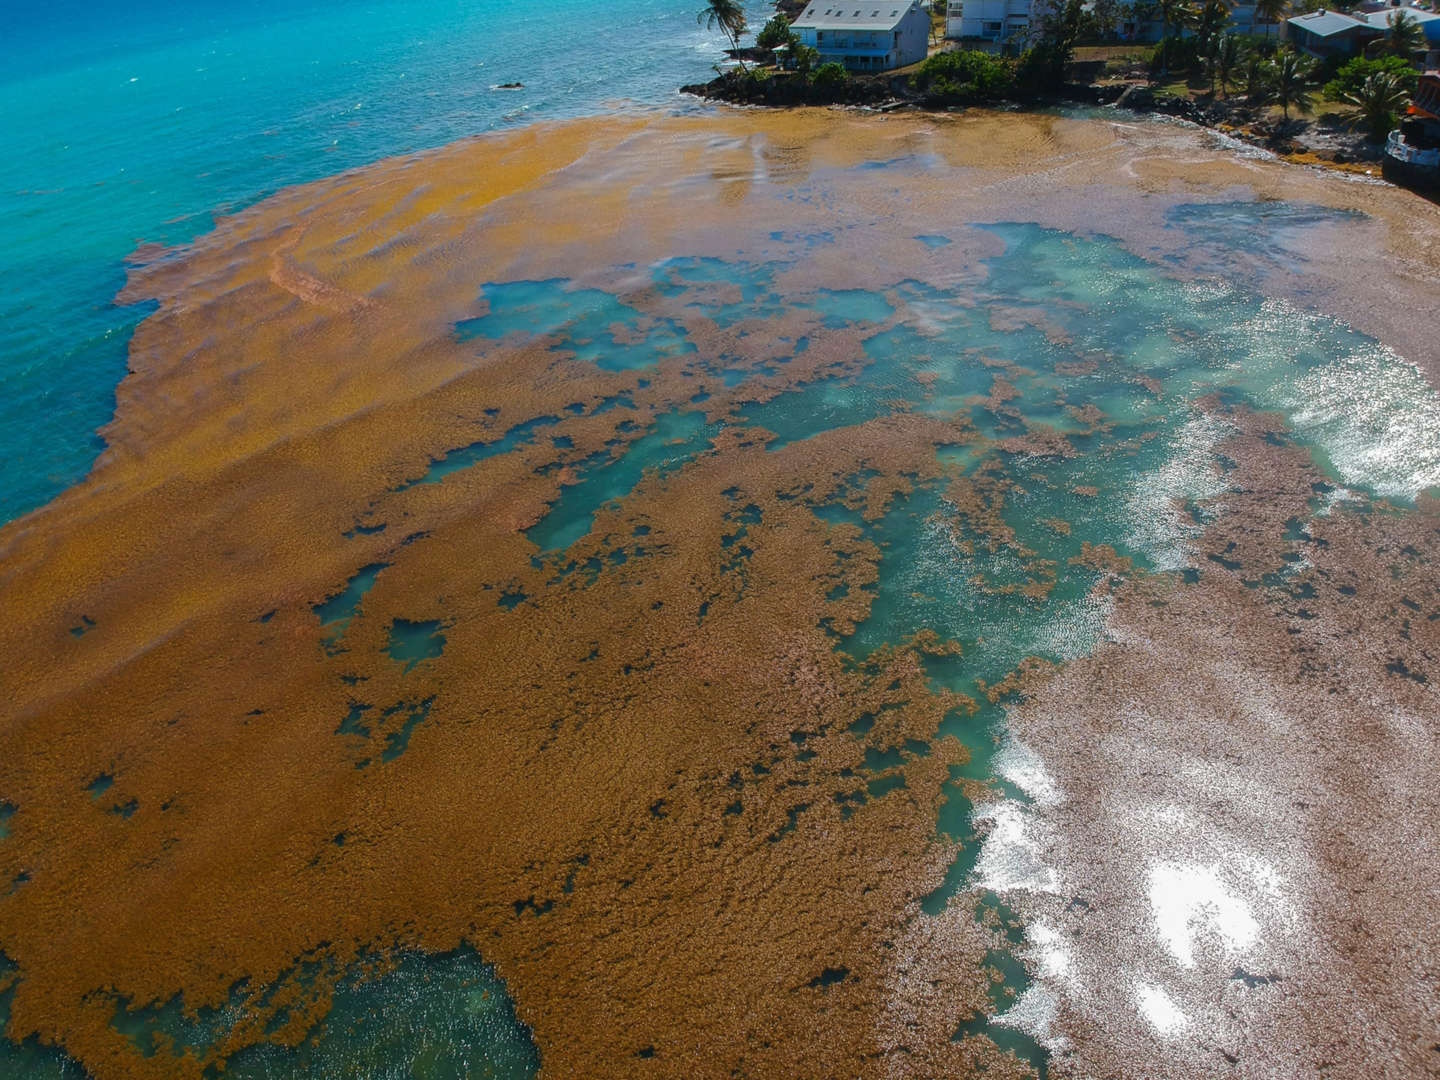 Seaweed encroaches on the coast of Le Gosier, a city on the French Caribbean Island of Guadeloupe, on 23 April 2018. The Great Atlantic Sargassum Belt will wash up on beaches throughout the Caribbean and Florida this spring and summer. Photo: Helene Valenzuela / AFP / Getty Images